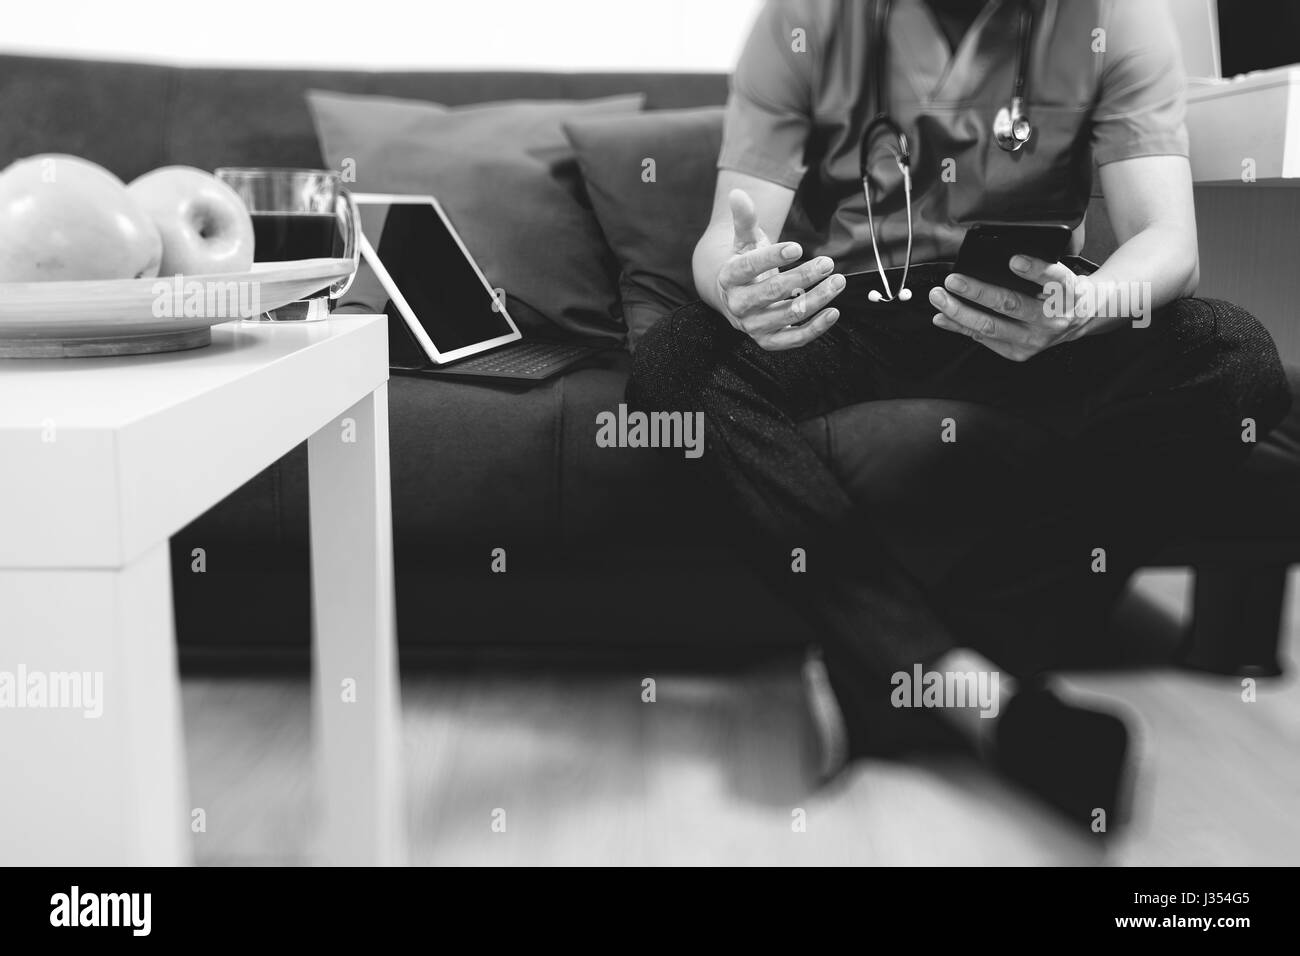 Medical and Health context,doctor hand working with smart phone,digital tablet computer,stethoscope,sitting on sofa in living room,black and white Stock Photo